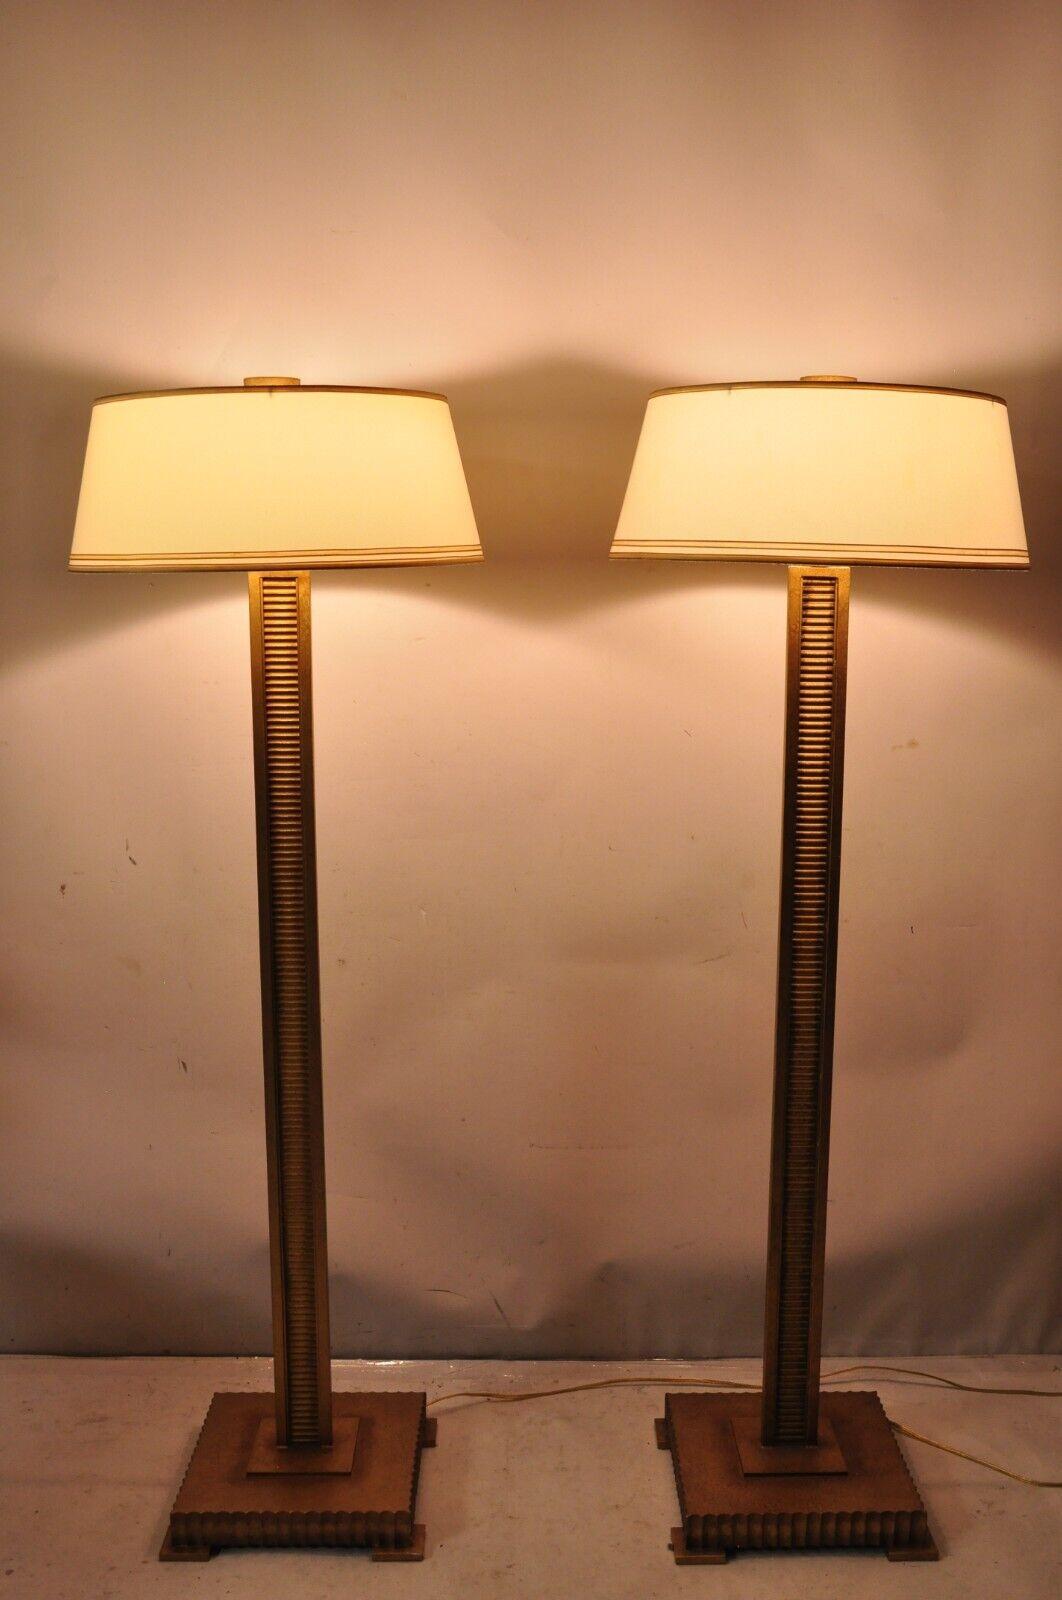 Decorator Fine Art Lamps Gold Gilt  Metal Skyscraper Modern Floor Lamps - a Pair. Item features original round cloth shades, clean modern lines, burnished gold finish, very nice pair. Circa  21st Century. Measurements: 64